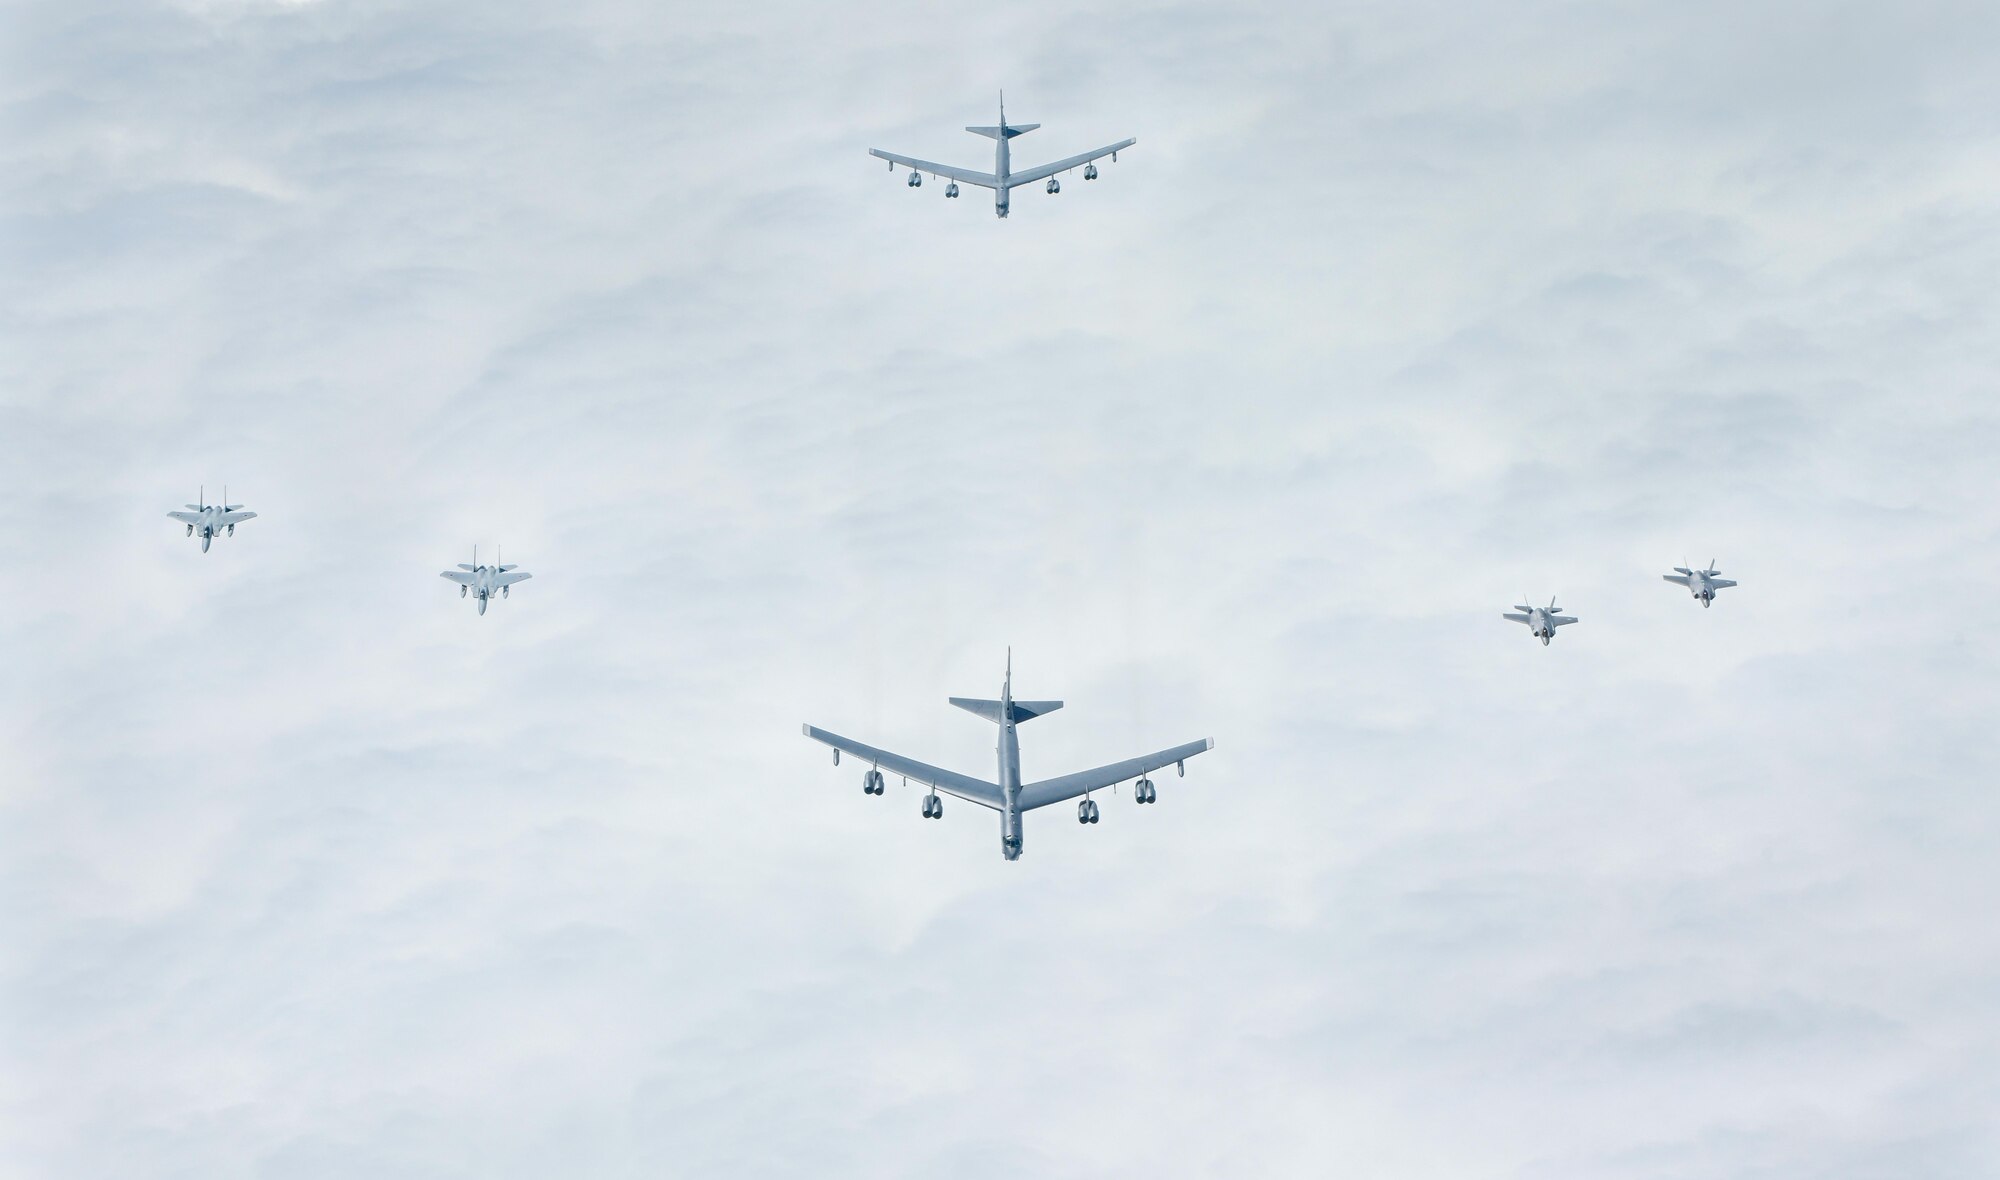 Two Japan Air Self-Defense Force F-15MJs, two U.S. Air Force B-52s Stratofortresses and two U.S. Air Force F-35A Lightning IIs fly in a joint formation